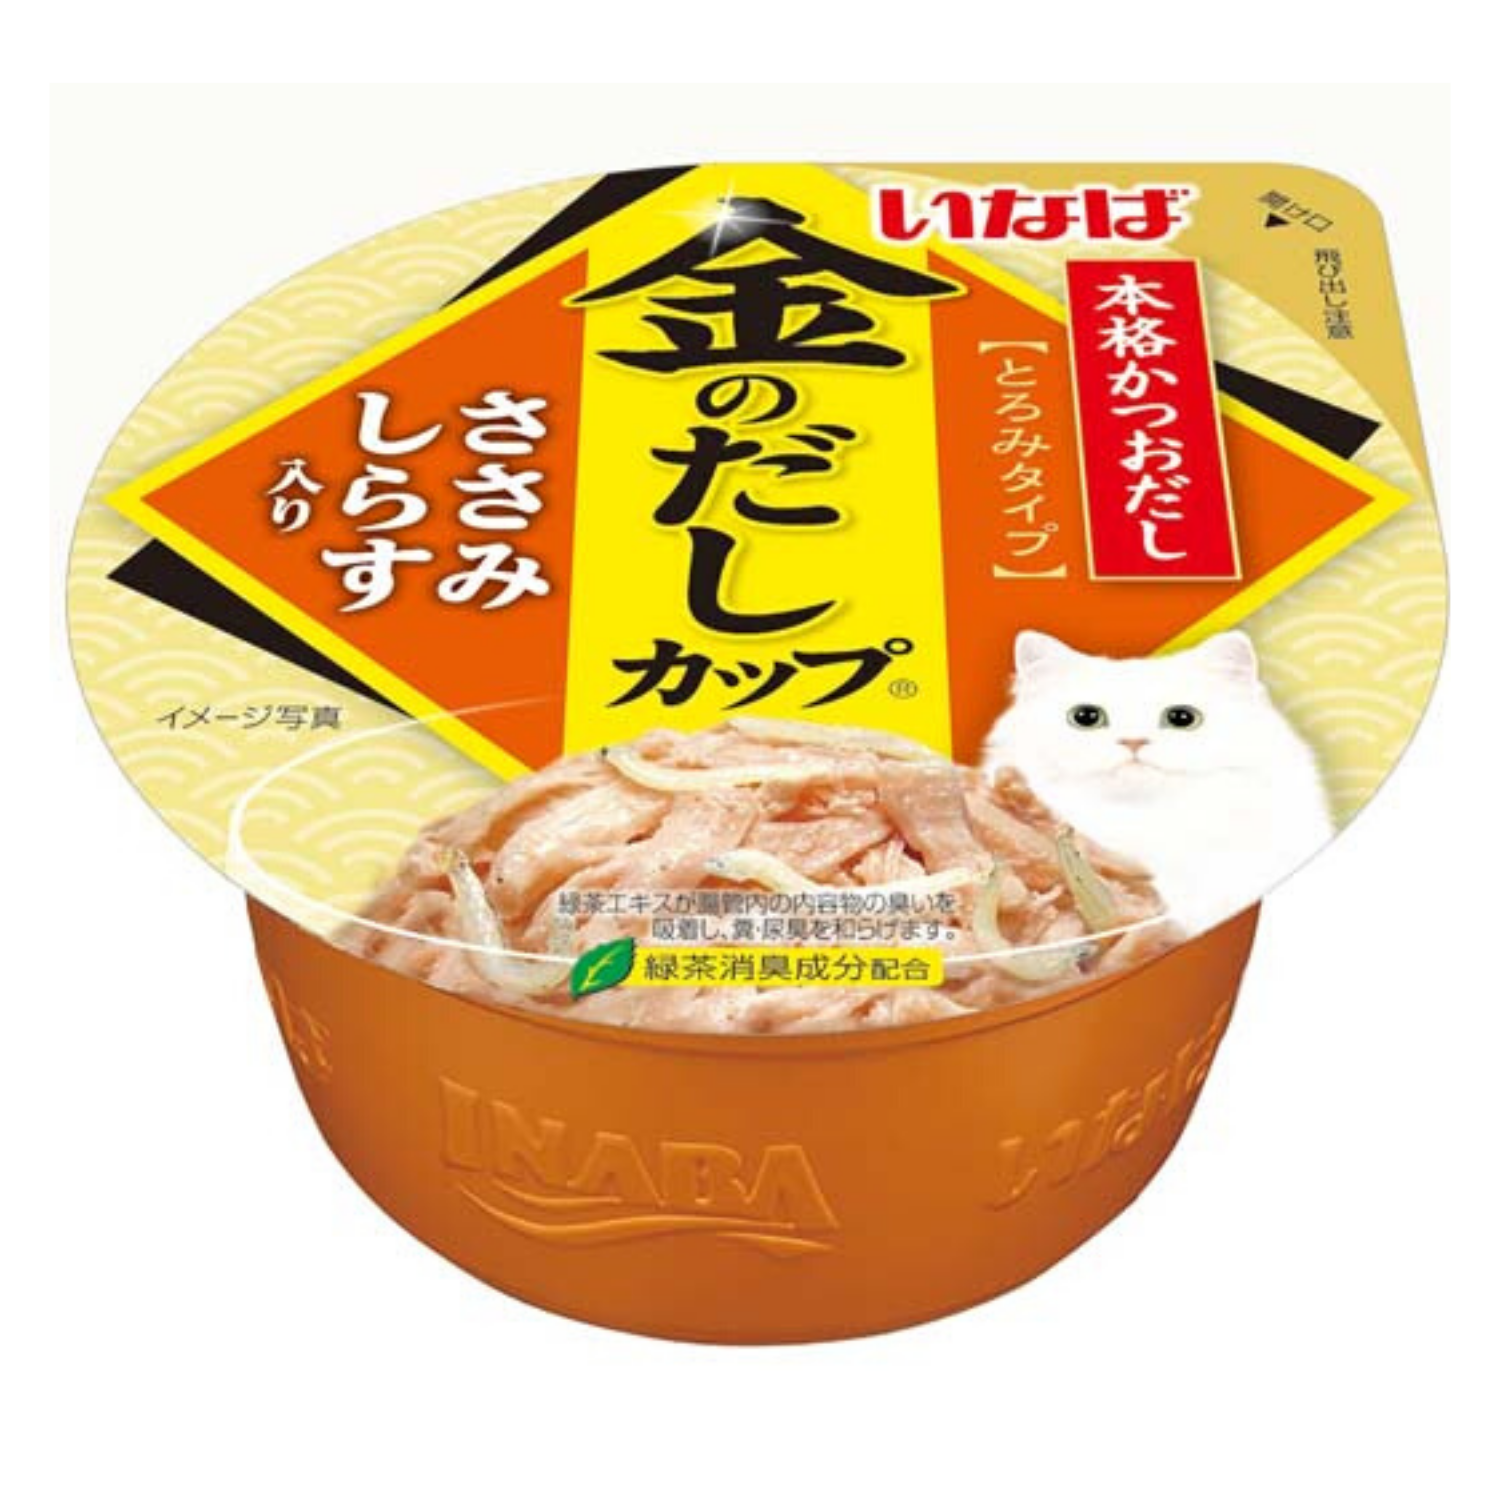 Ciao Kinnodashi Cup Chicken Fillet in Gravy with Shirasu Topping - 70g